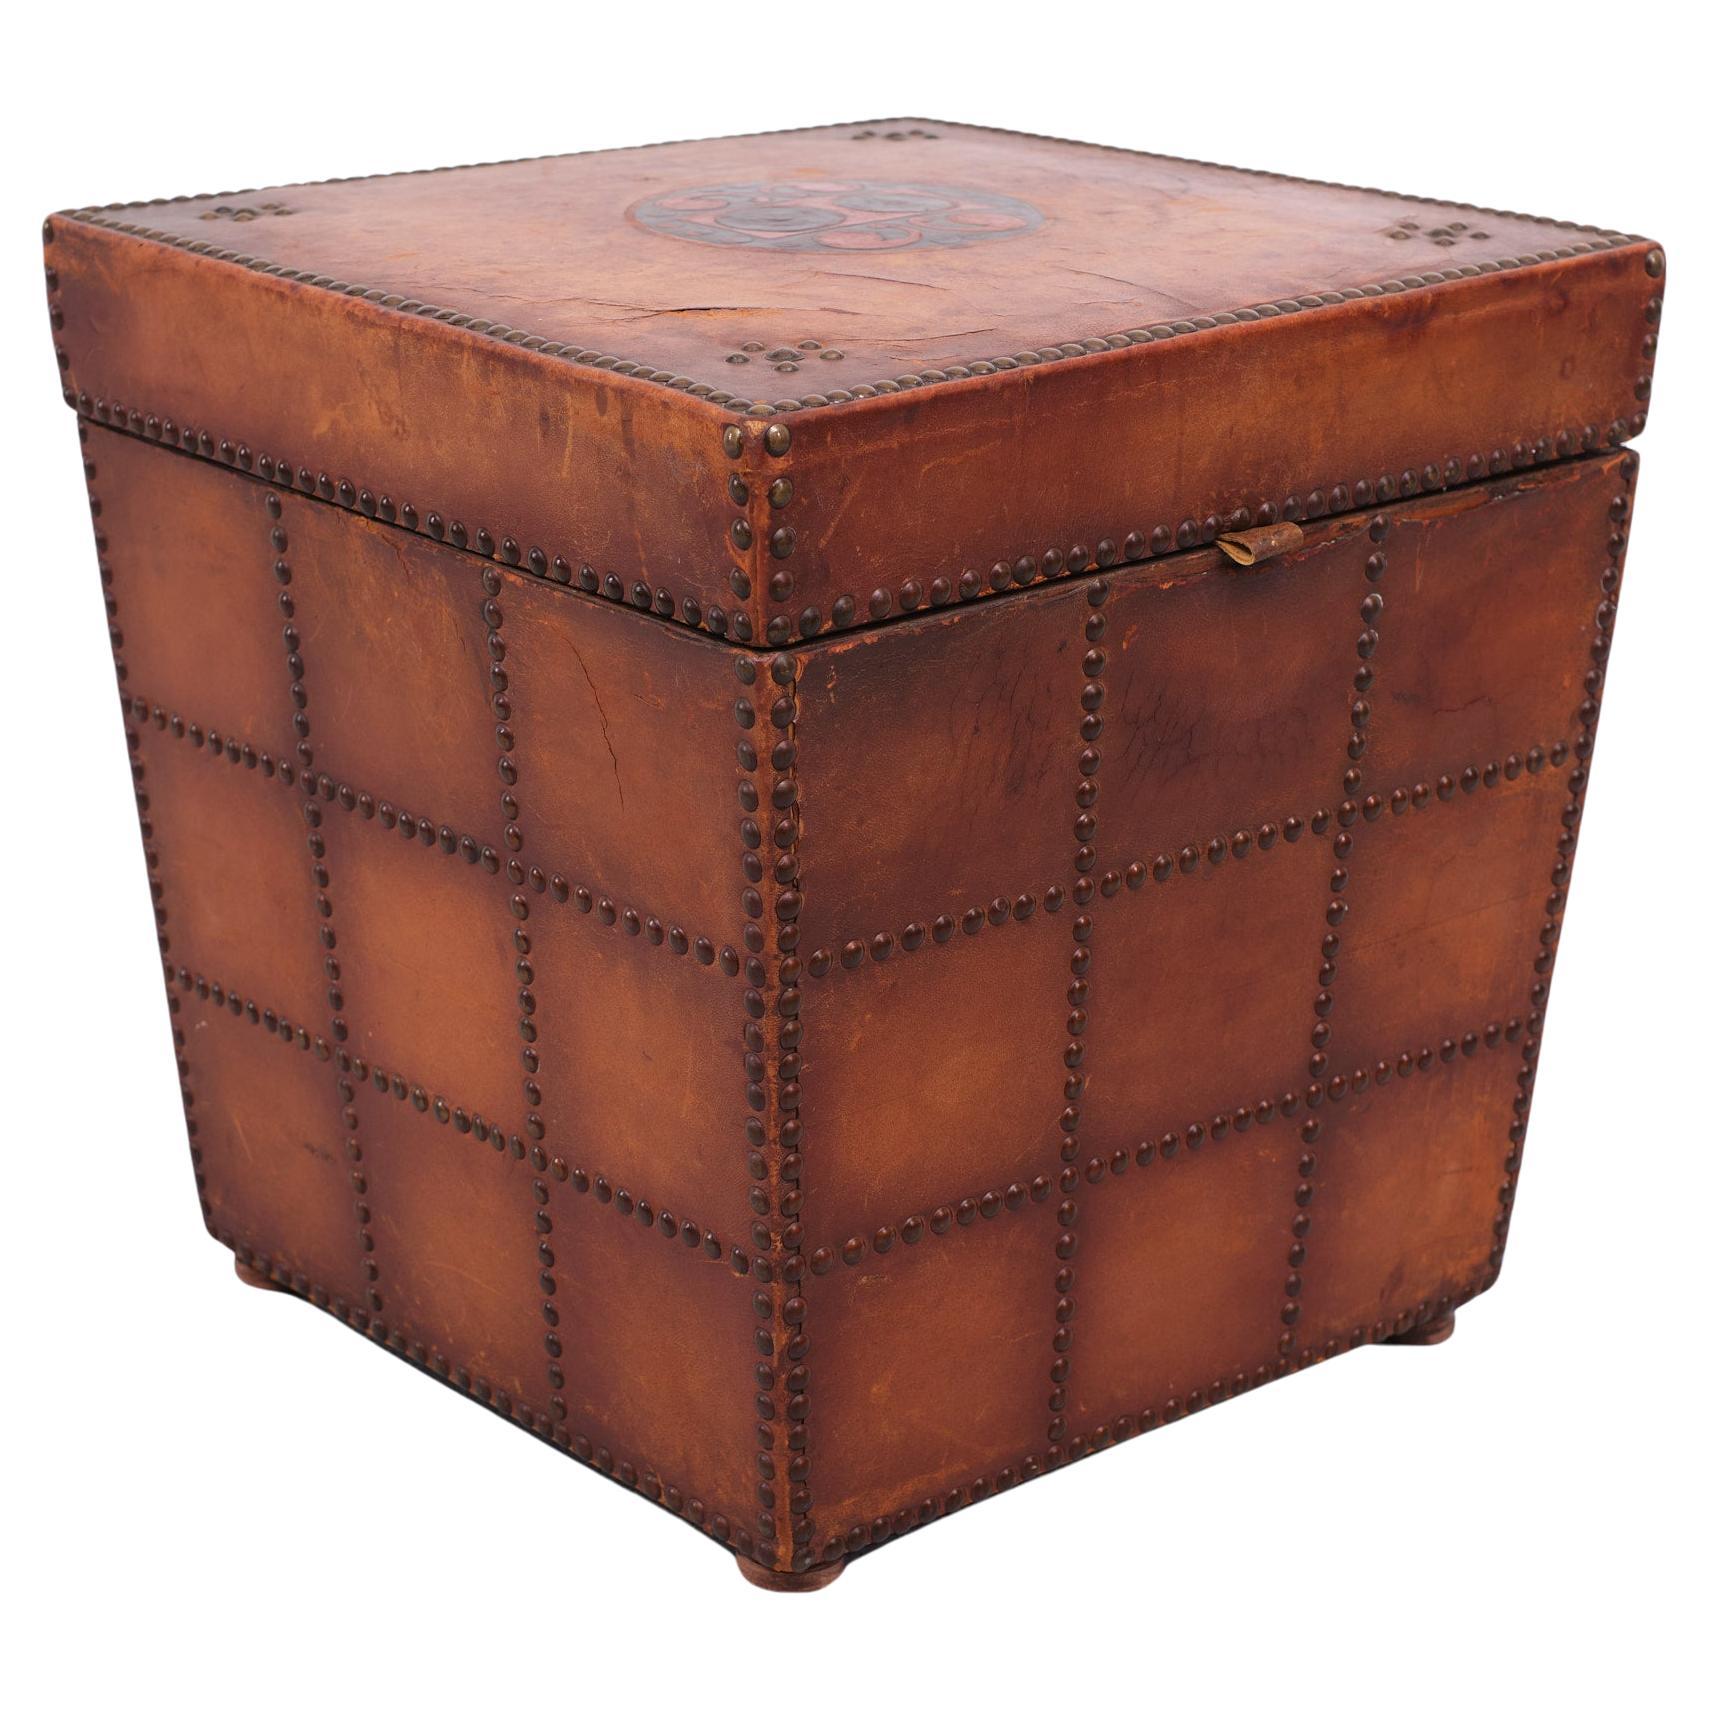 Very nice Leather embossed Antique box or small chest Great patine Cognac Color. Deposited with Brass Head Nails.